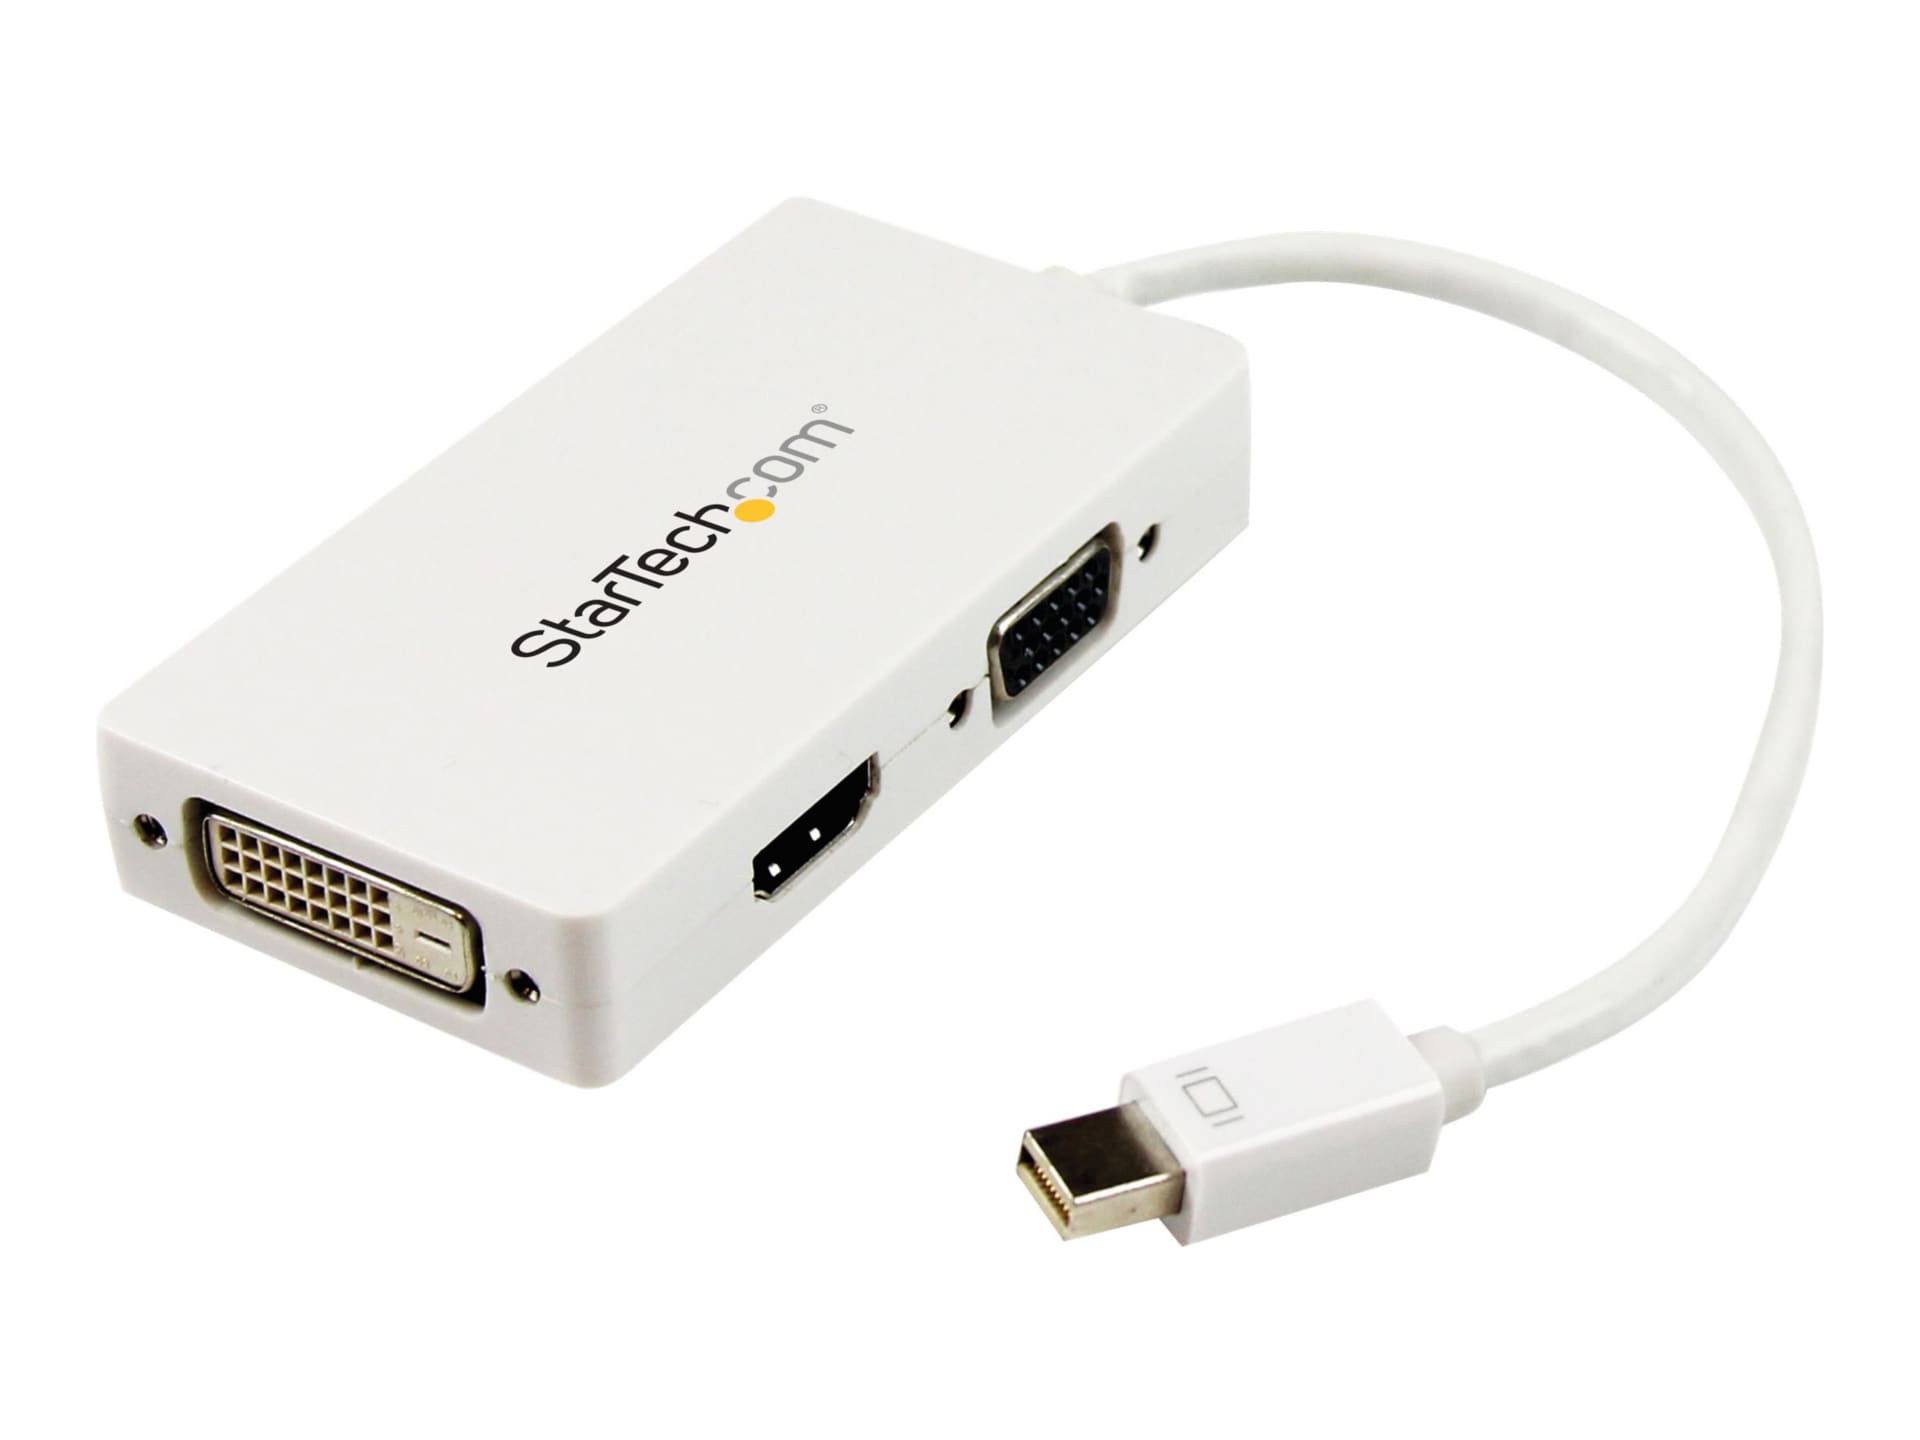 Betsy Trotwood Tekstforfatter Juster StarTech.com 3-in-1 Mini DisplayPort Adapter - mDP to VGA, DVI-D or HDMI -  MDP2VGDVHDW - Monitor Cables & Adapters - CDW.com